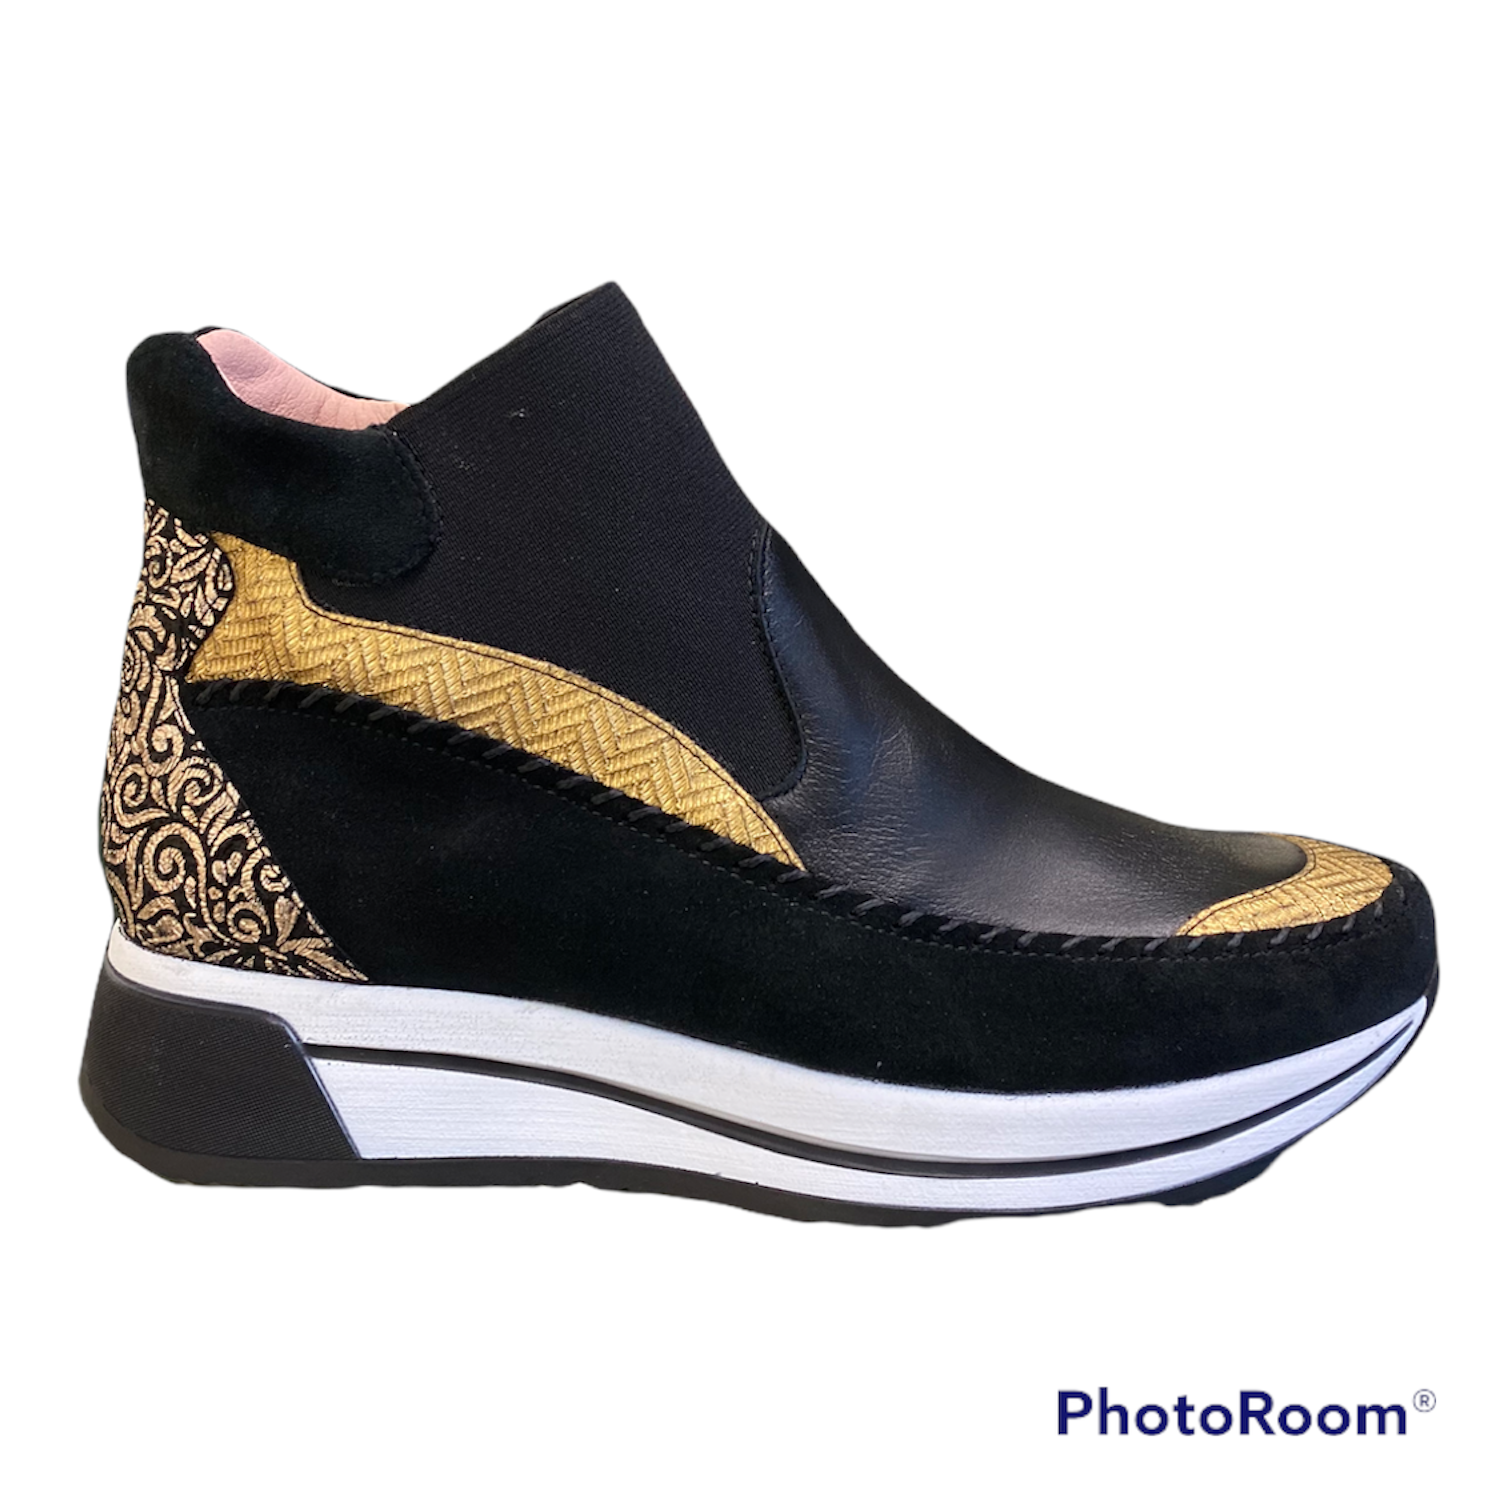 Maria Leon Black and Gold Pull on Ankle boot